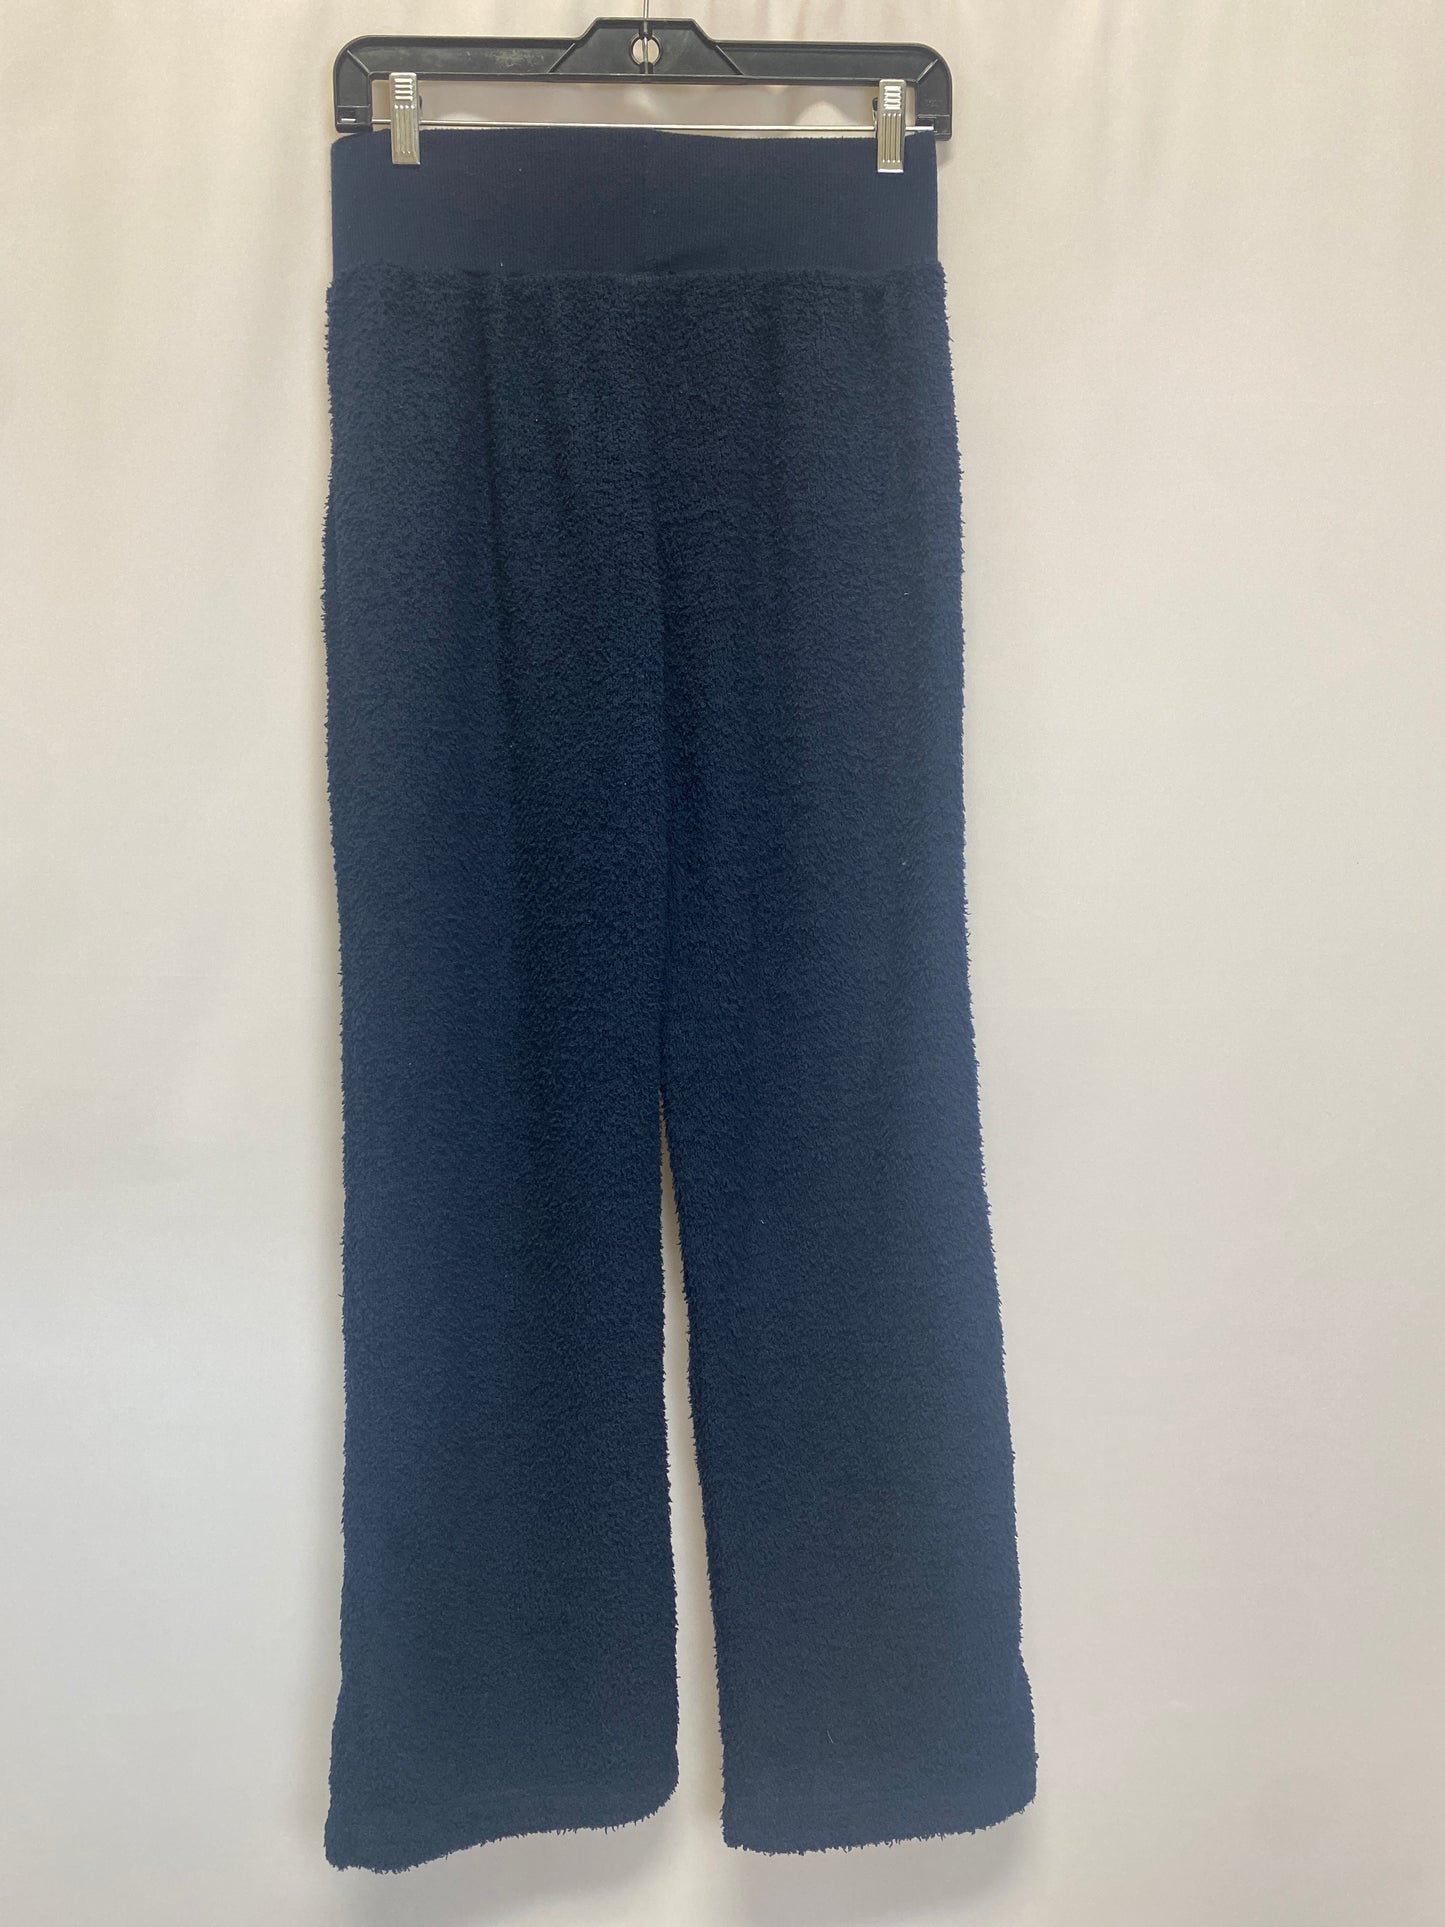 Athletic Pants 2pc By Tommy Hilfiger  Size: S